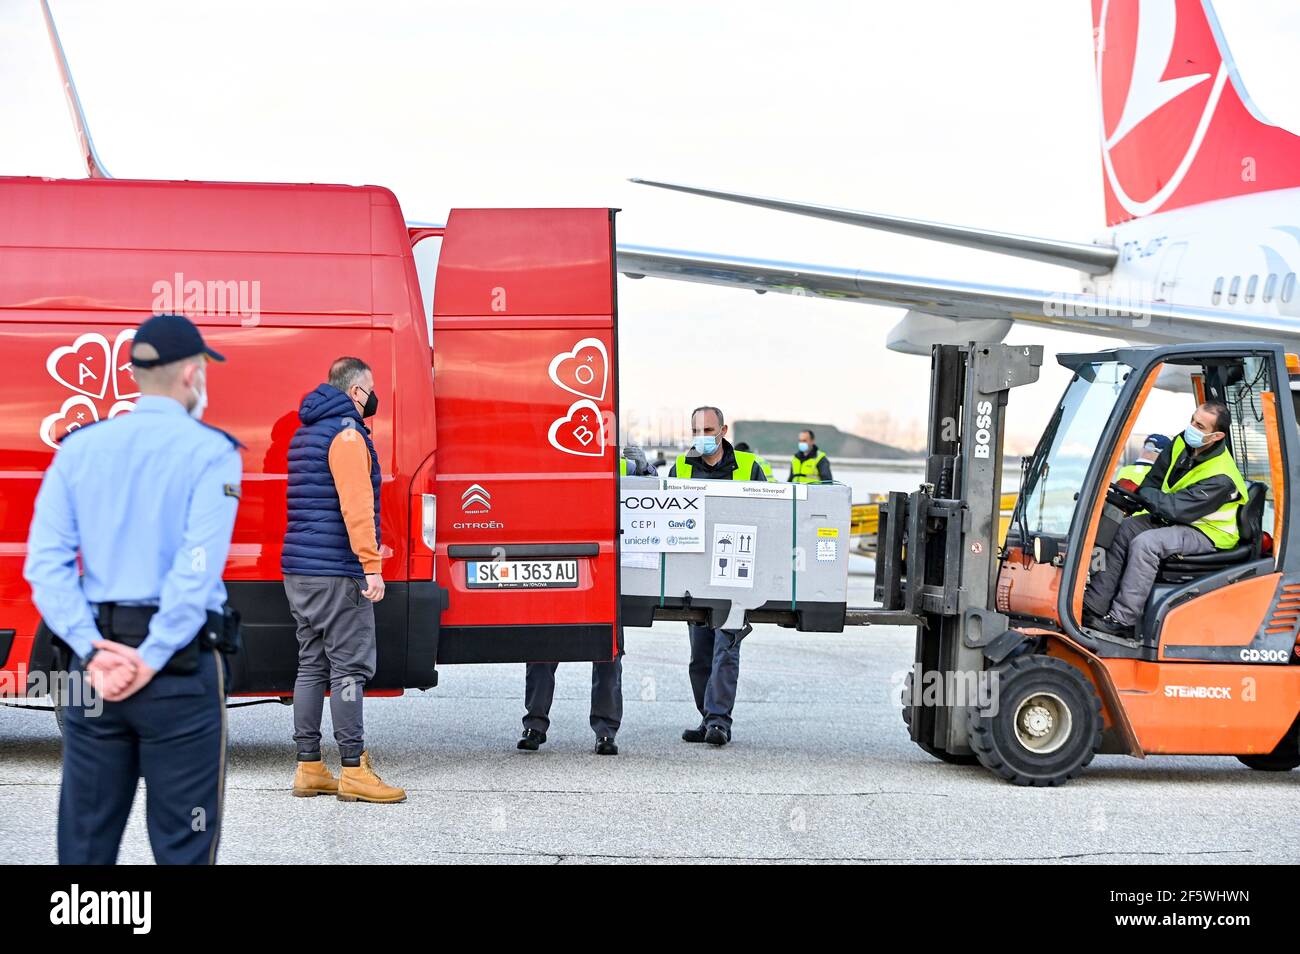 Skopje, North Macedonia. 28th Mar, 2021. Workers load North Macedonia's  first batch of AstraZeneca's COVID-19 vaccines received through the  UN-backed Covax program, at Skopje's International Airport in Skopje, North  Macedonia, March 28,